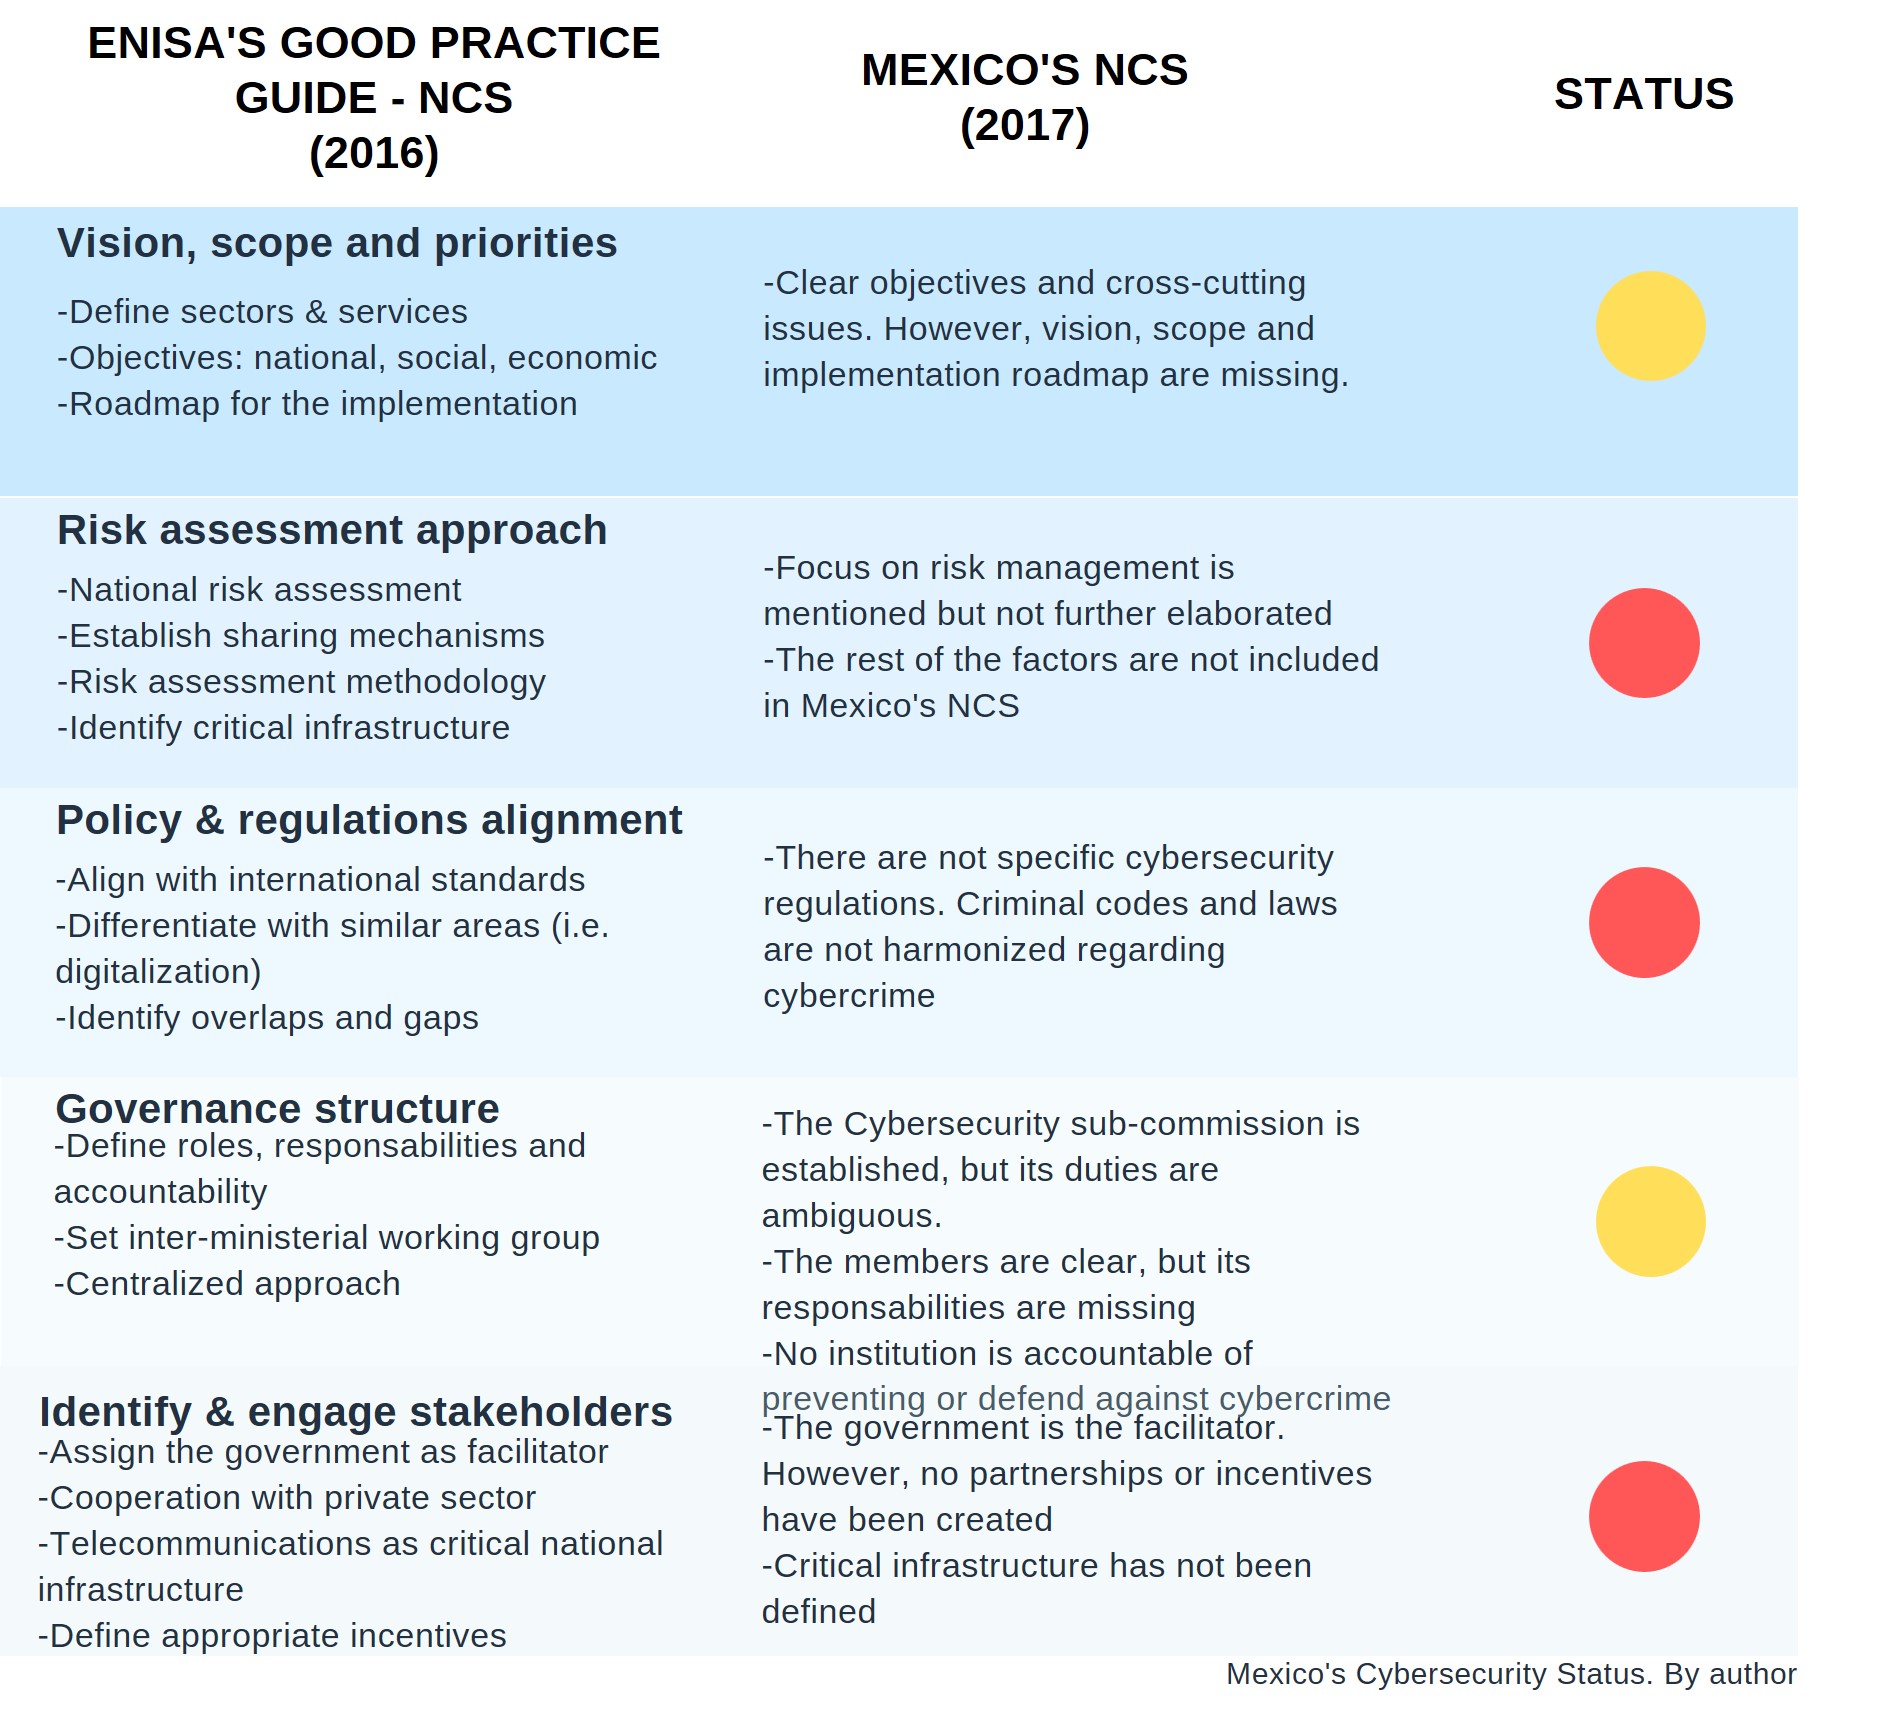 Shortcomings and gaps in Mexico's NCS (figure 2)